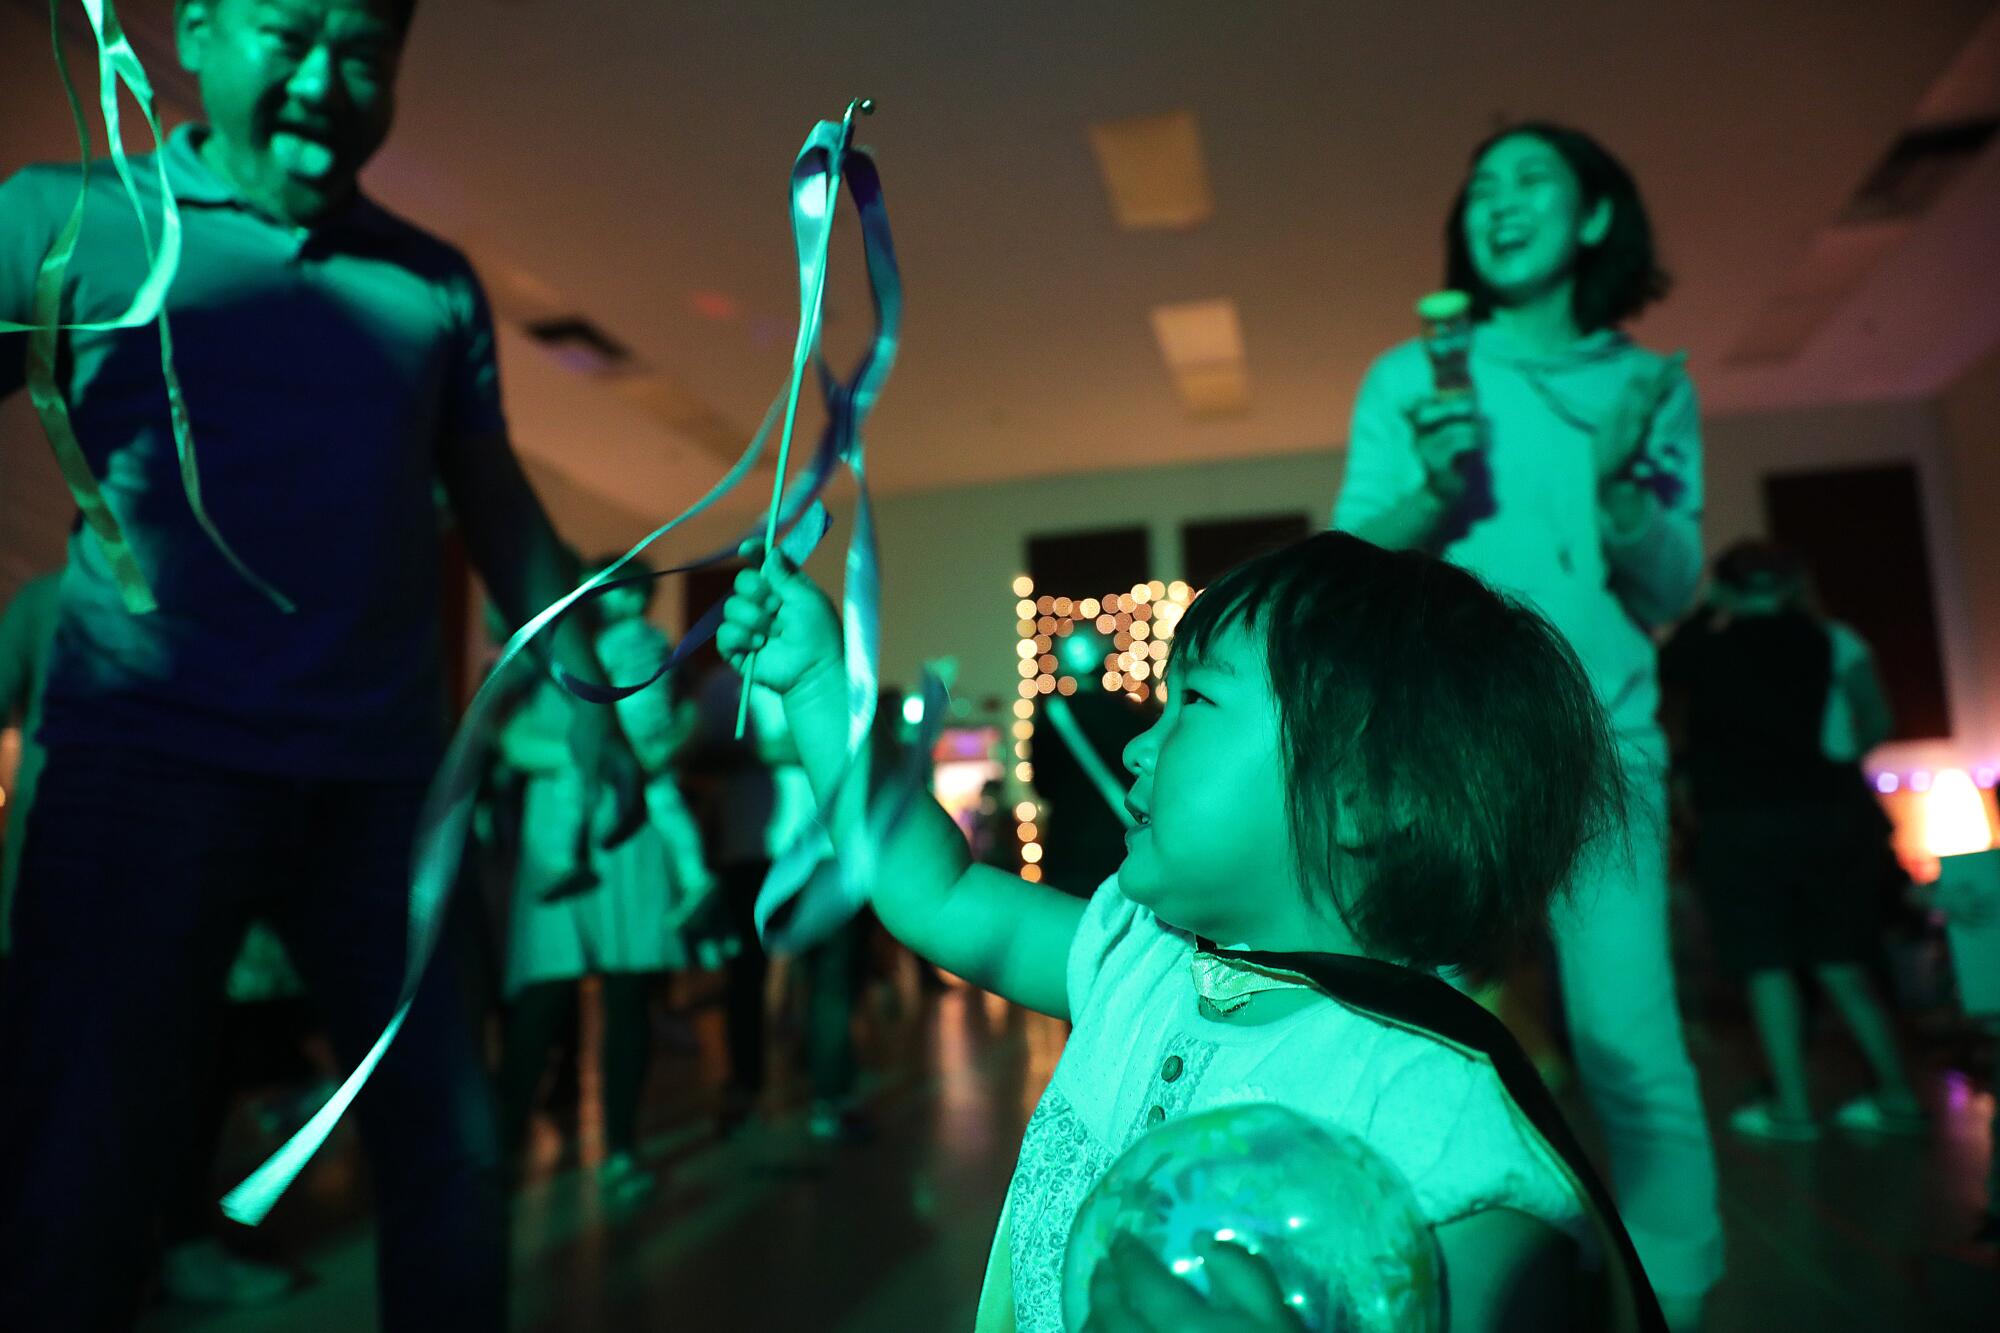 10-month-old Ariel Harenburg, center, soaks up the atmosphere at a recent Baby Rave.